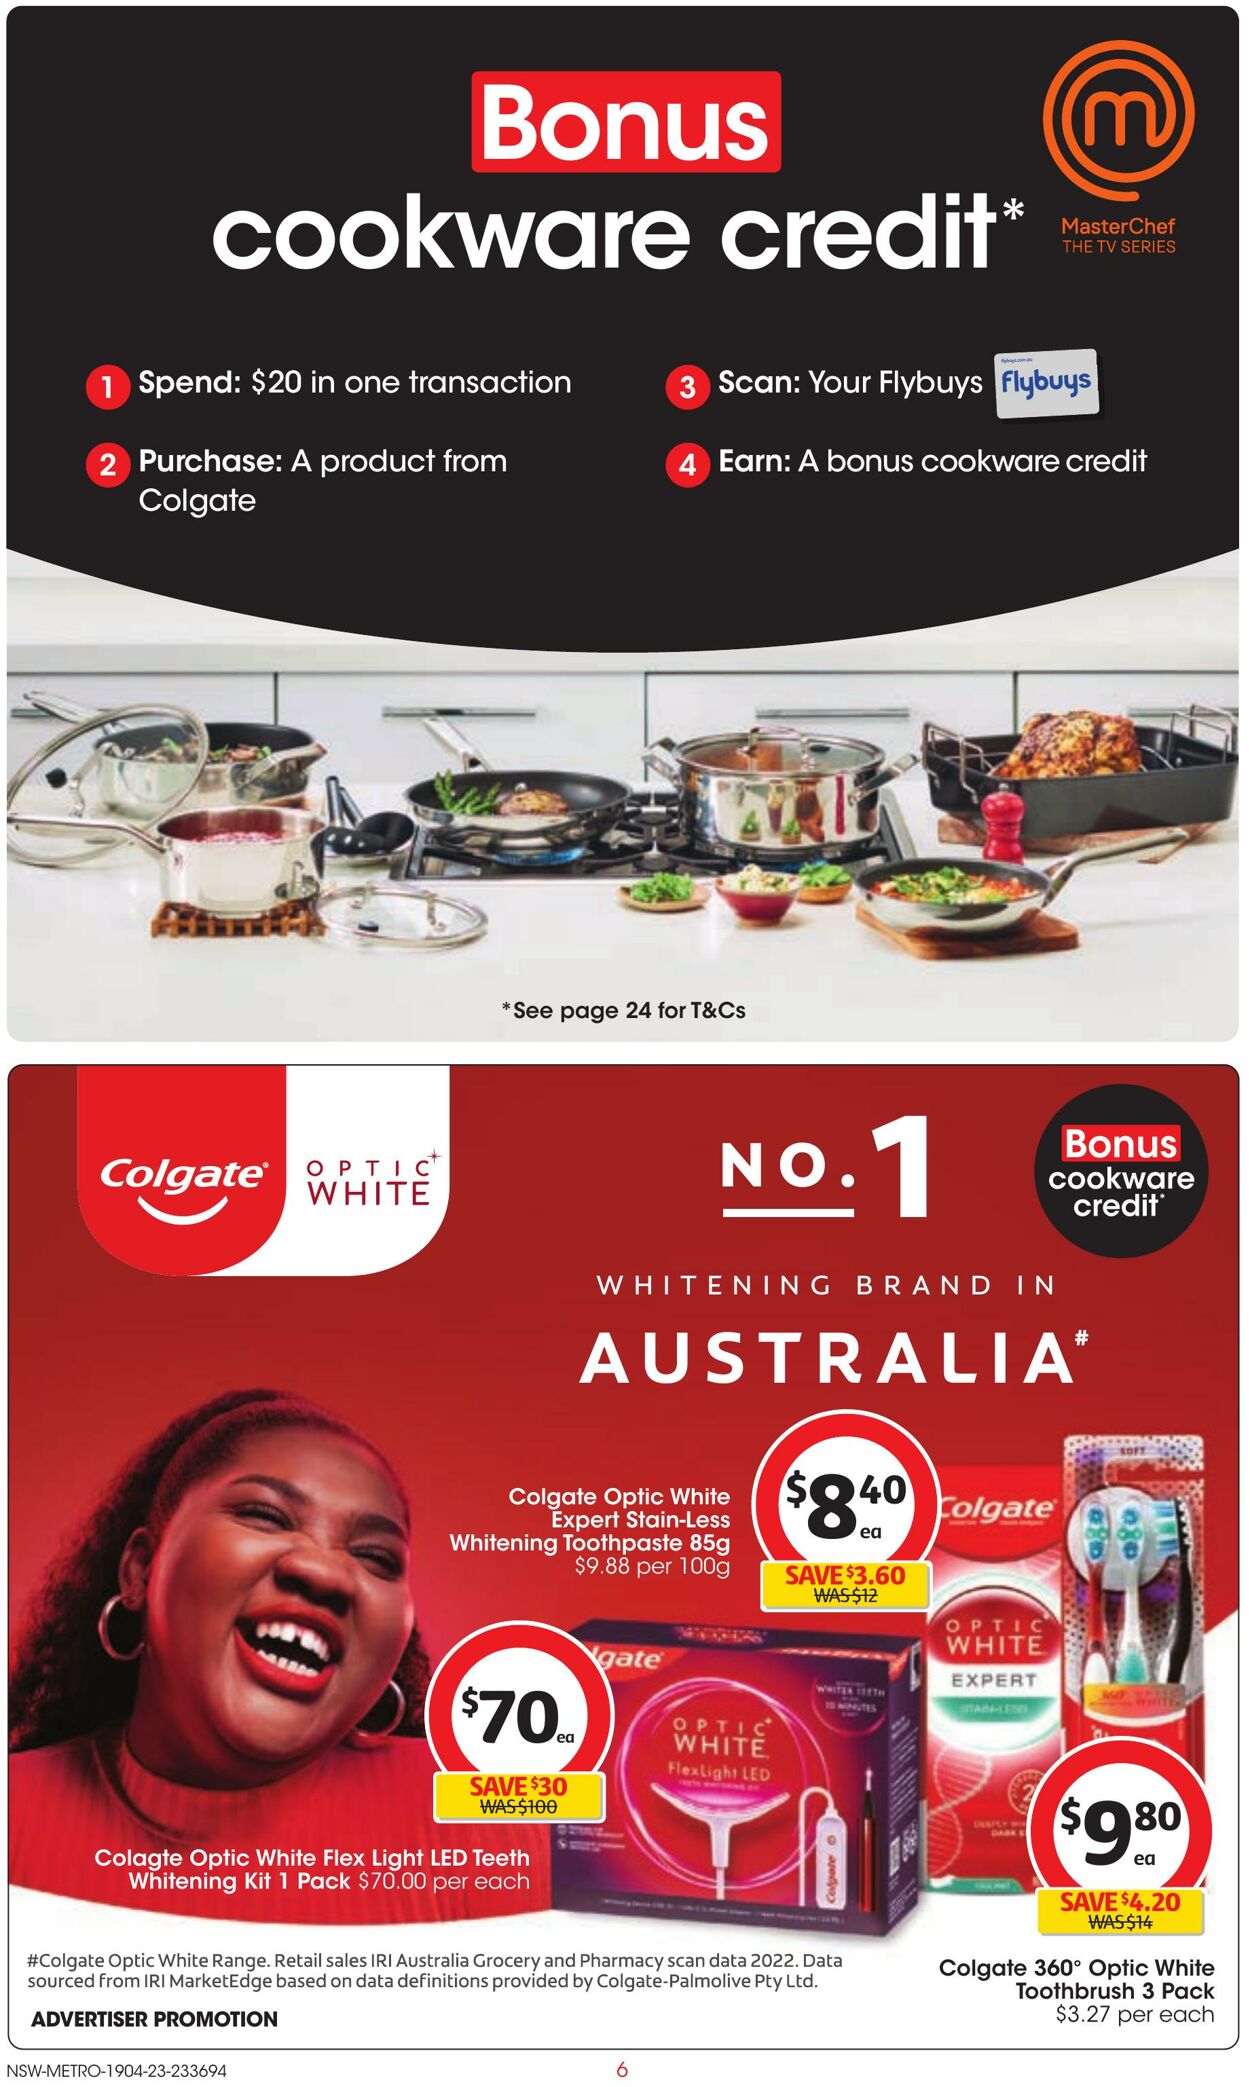 Coles Catalogue from 12/04/2023